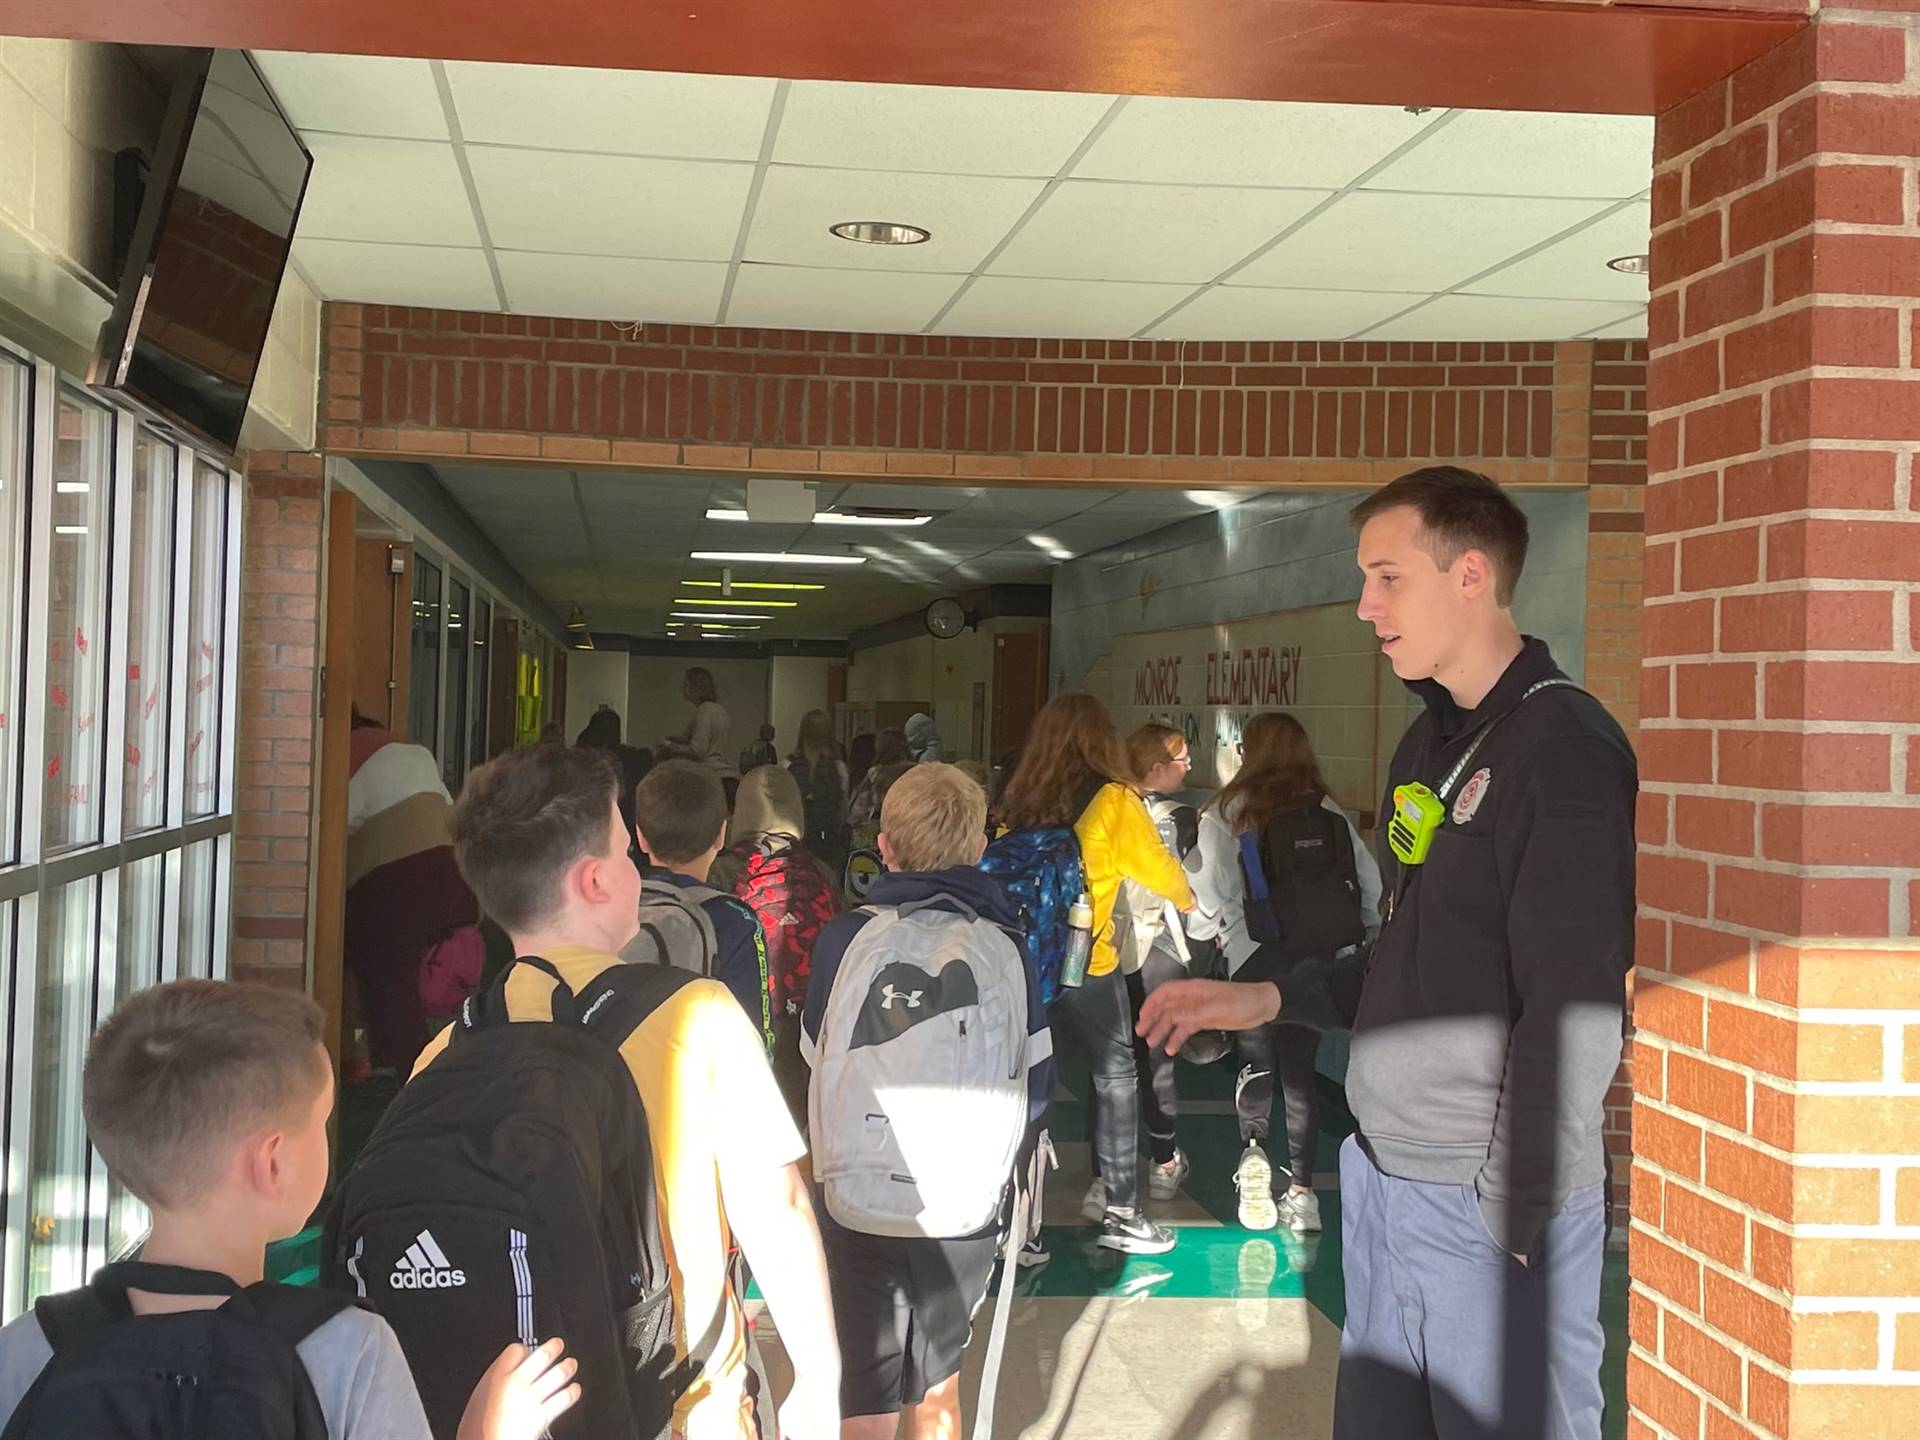 first hello firefighter greets students